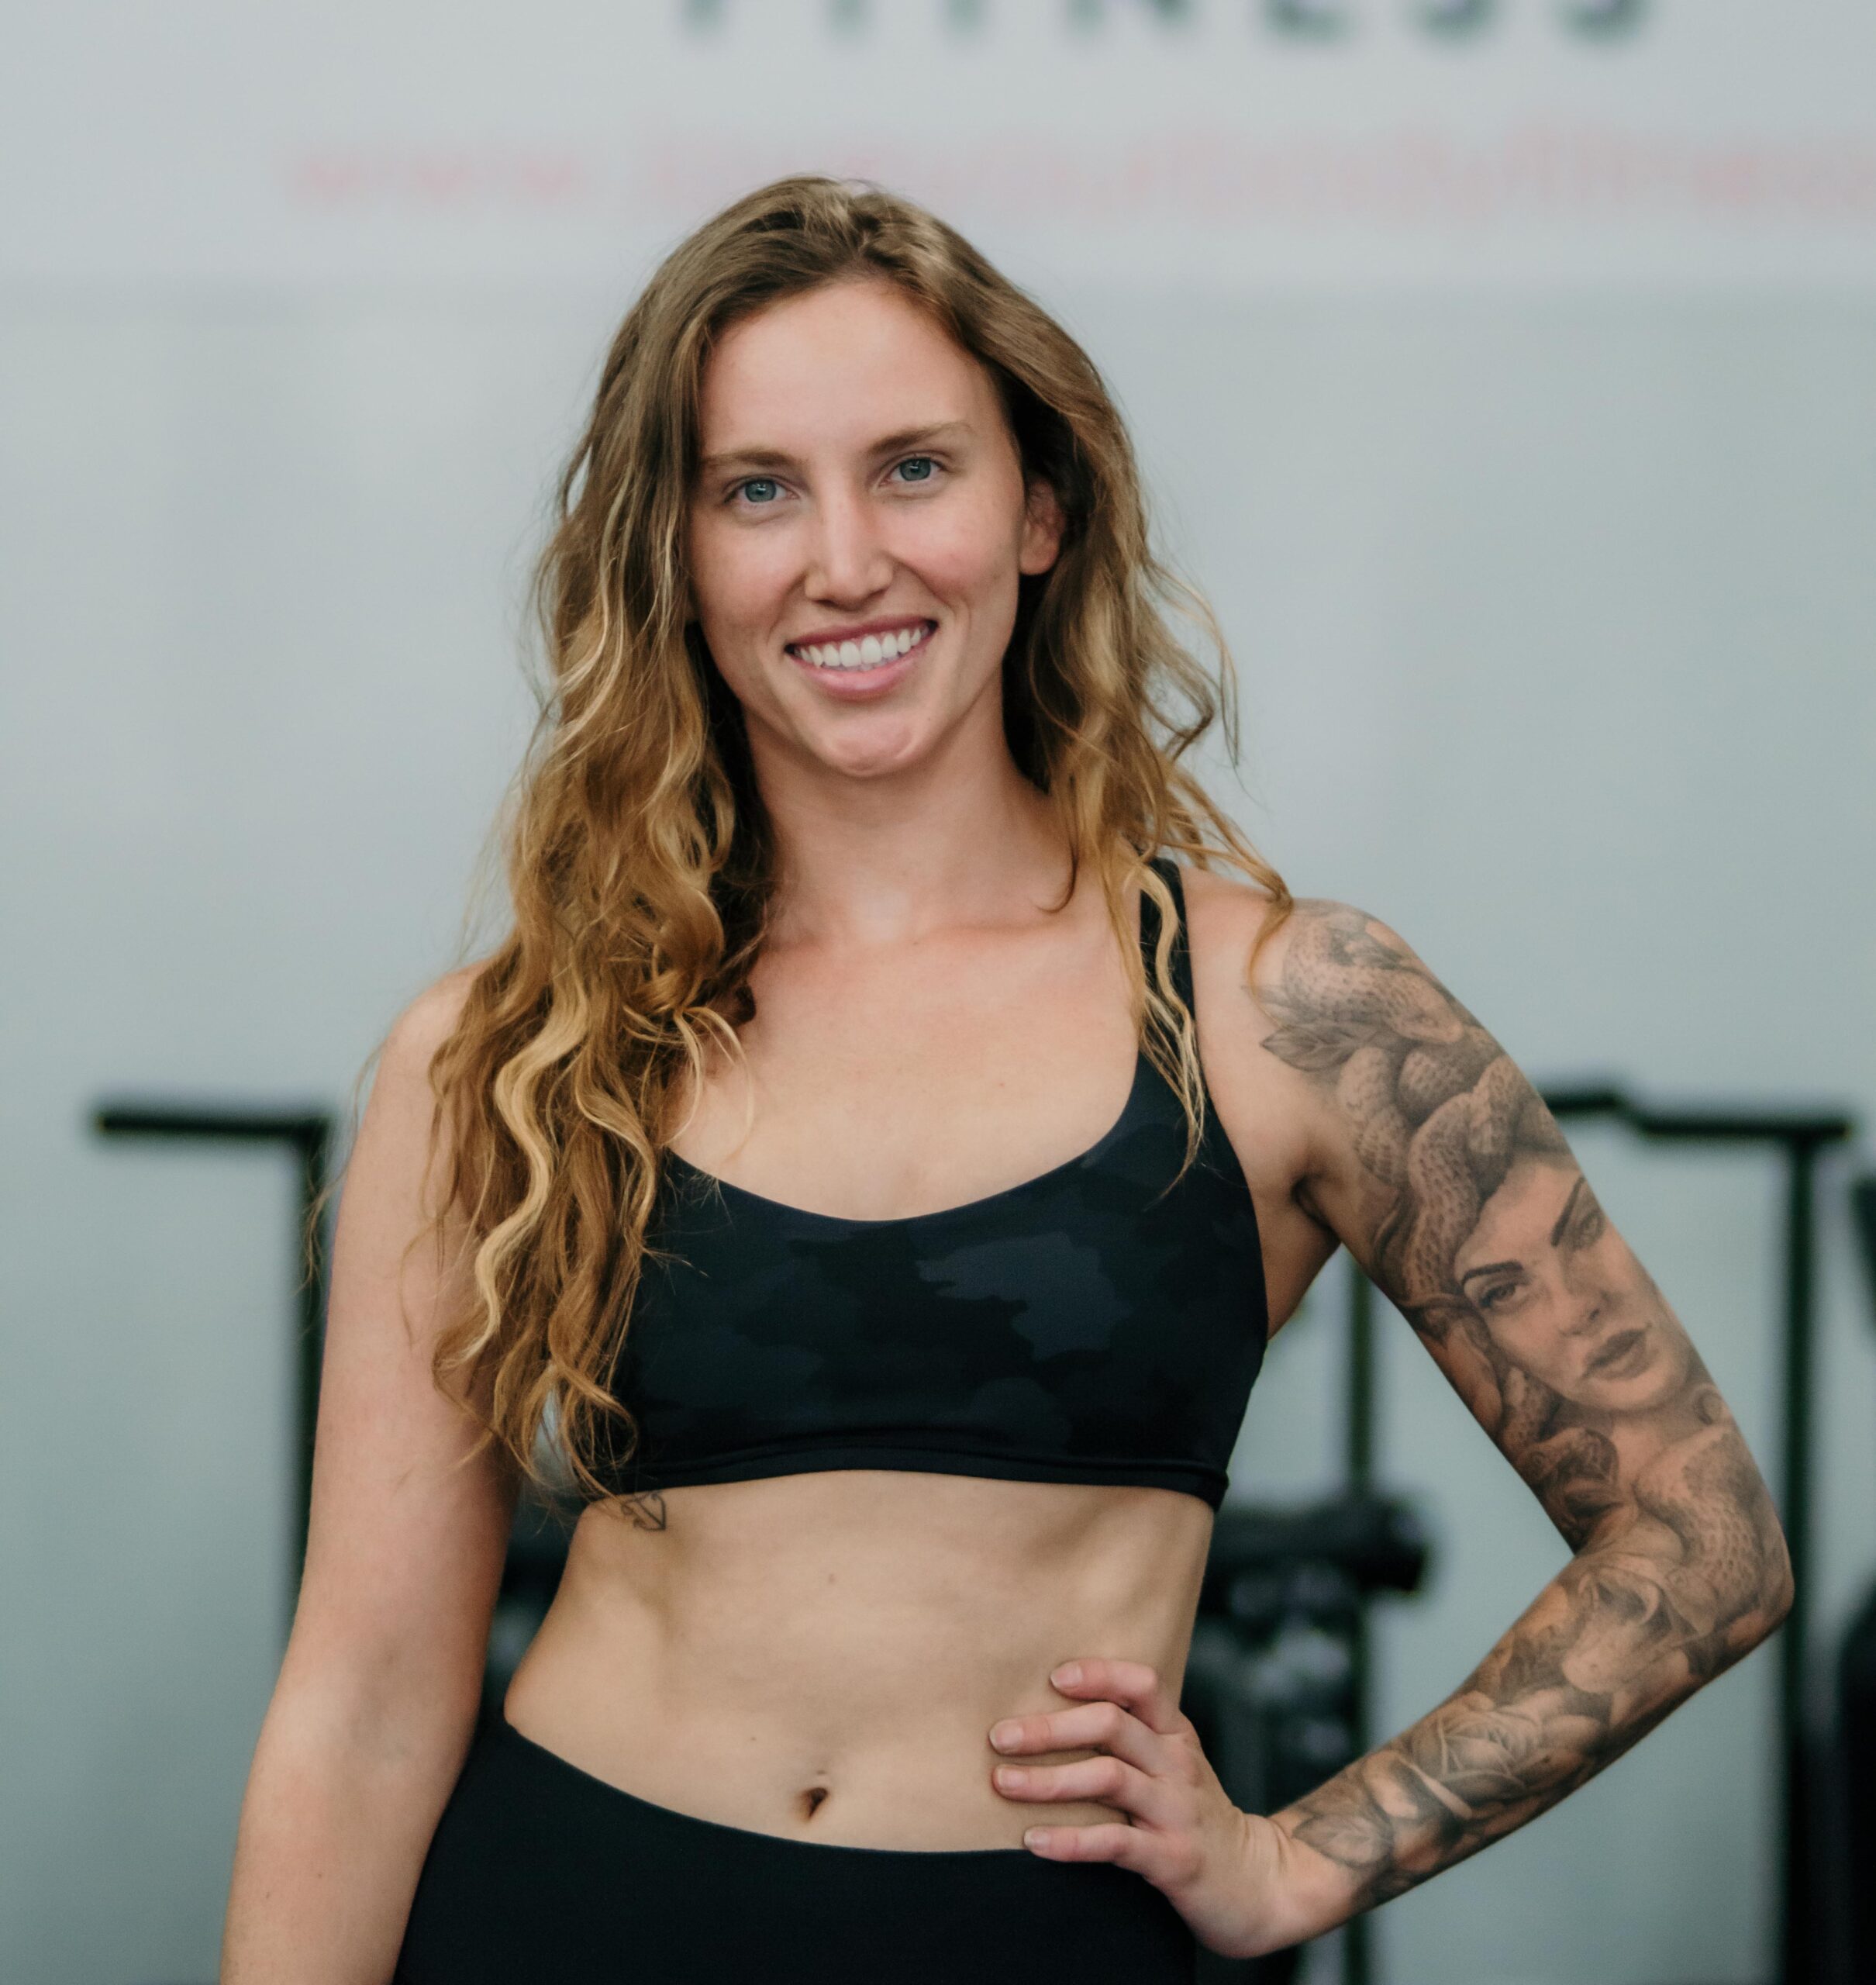 Meet The Much-Loved Samantha Wilkie Of Love Your Body Fitness